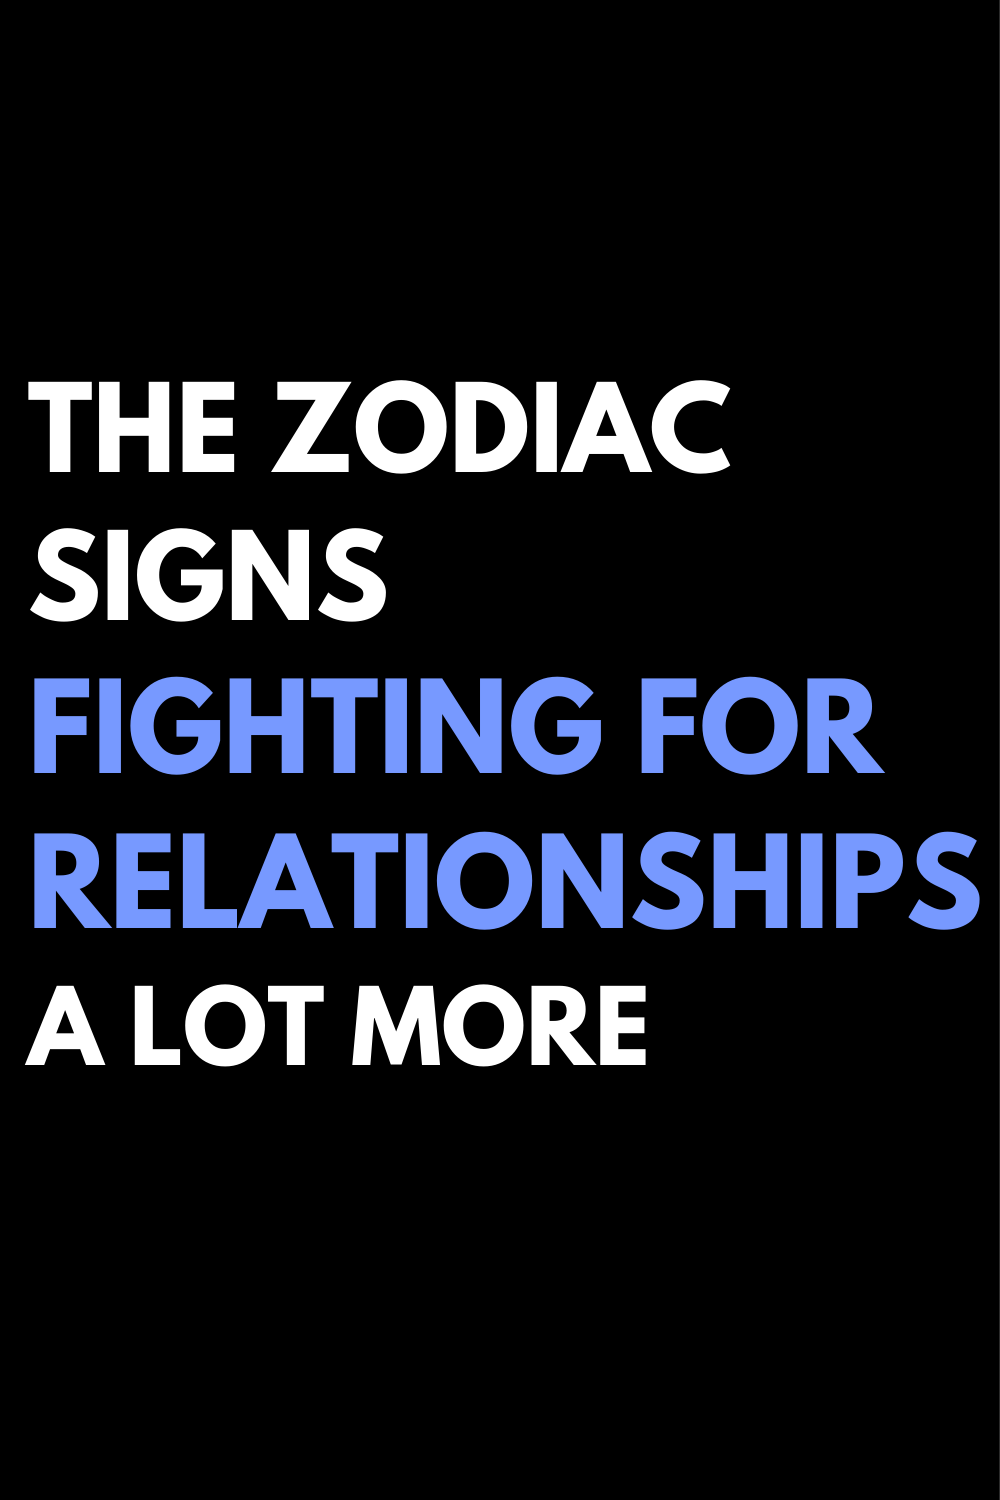 The zodiac signs fighting for relationships a lot more